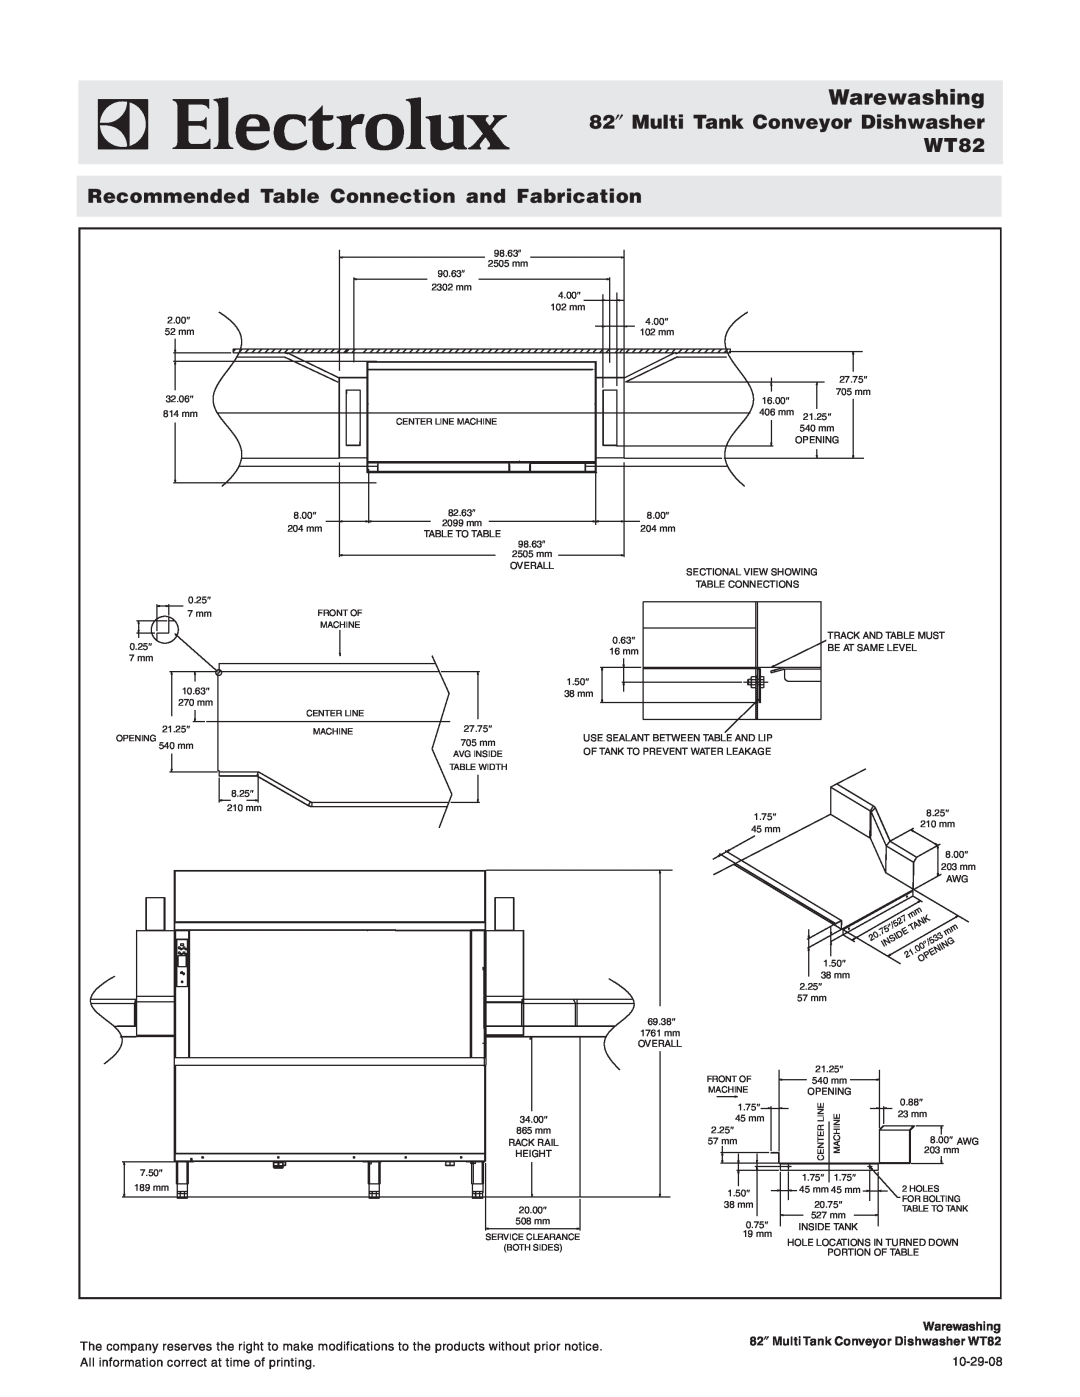 Electrolux 534180, wt82 Recommended Table Connection and Fabrication, Warewashing, 82″ Multi Tank Conveyor Dishwasher WT82 